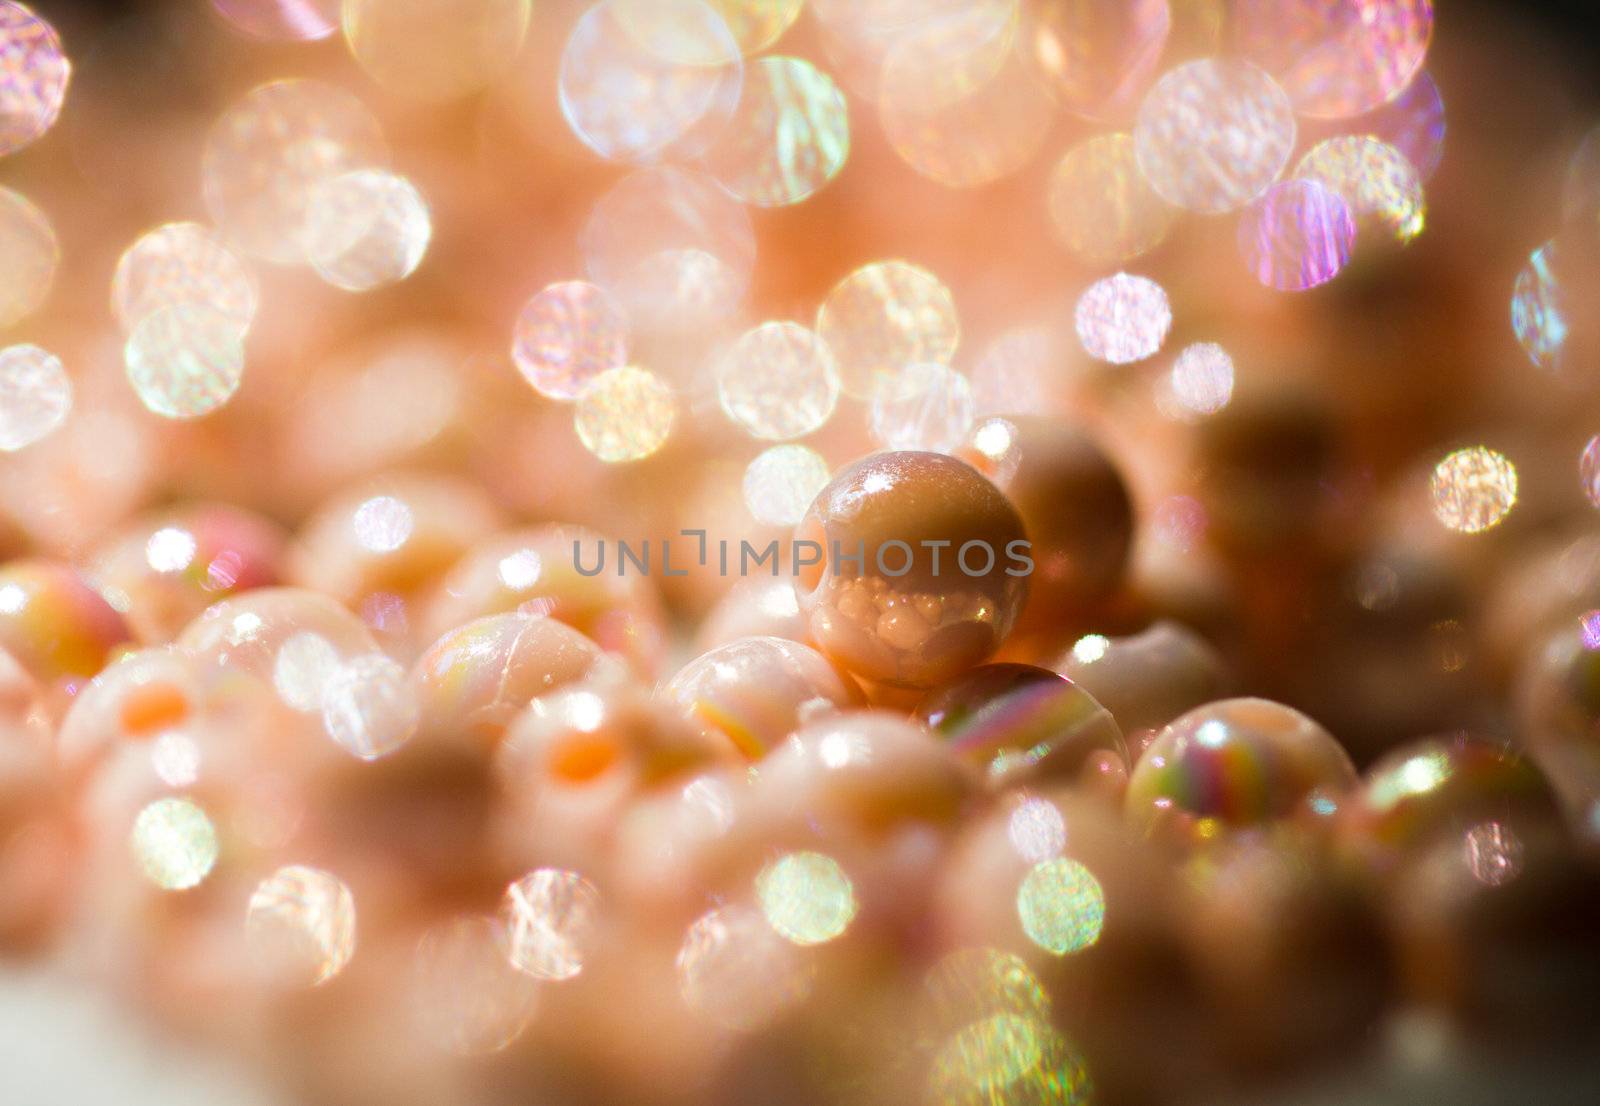 beige colored beads shine under sunlight with bright and dark area